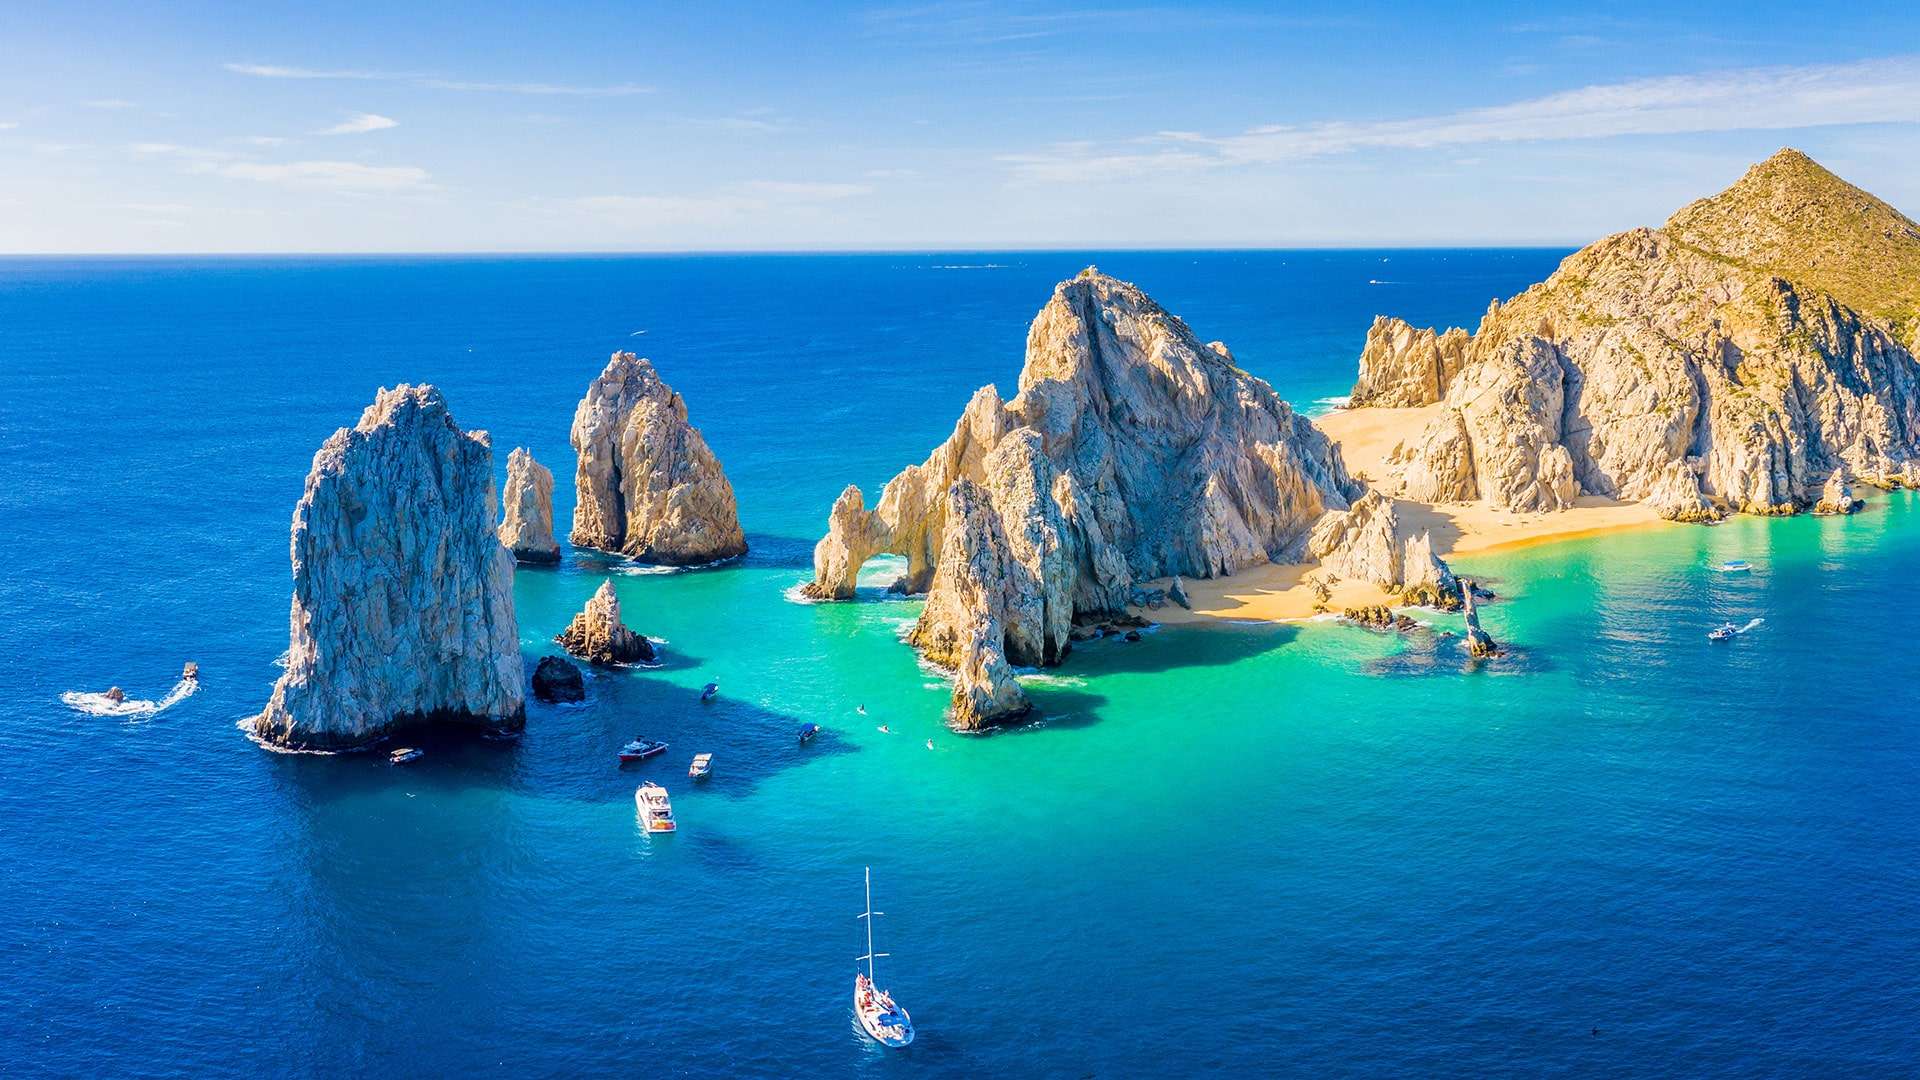 5 Fun Water Activities in Cabo March 15th, 2021 IST Spring Break